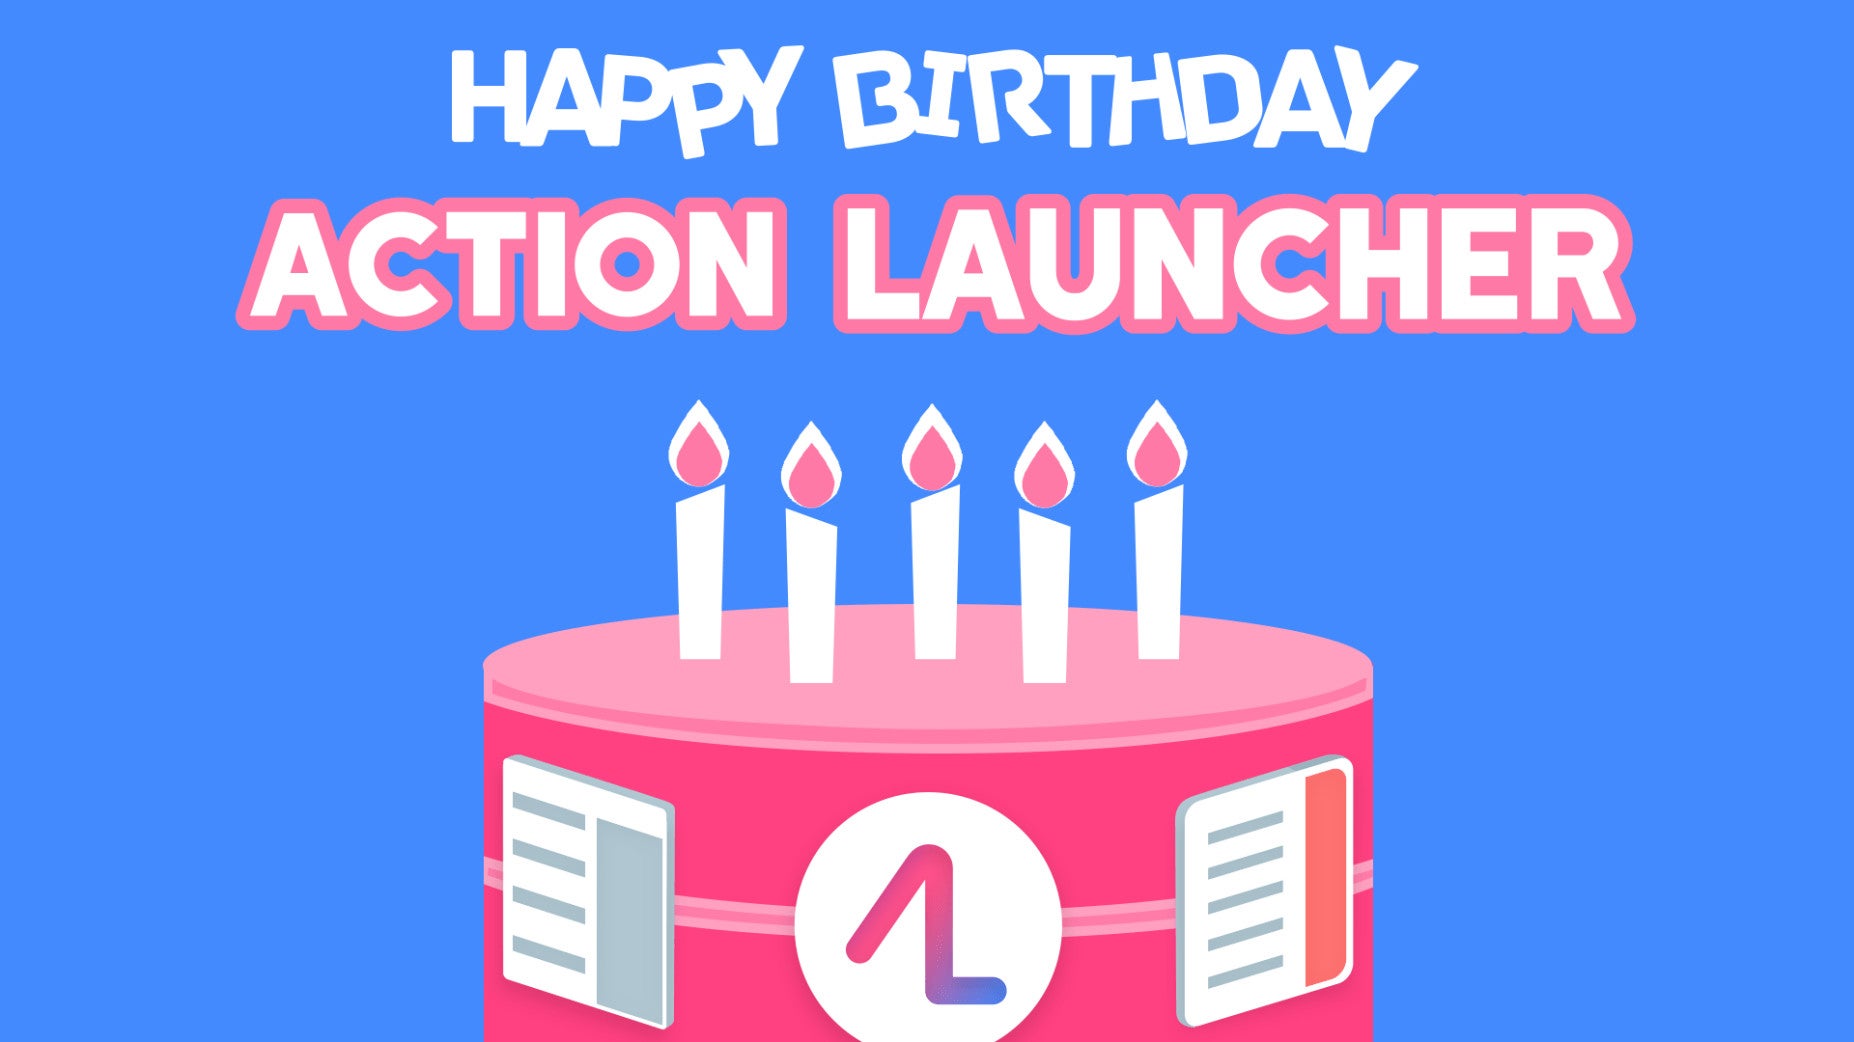 Action Launcher celebrates its 5th anniversary with release of new update and sale